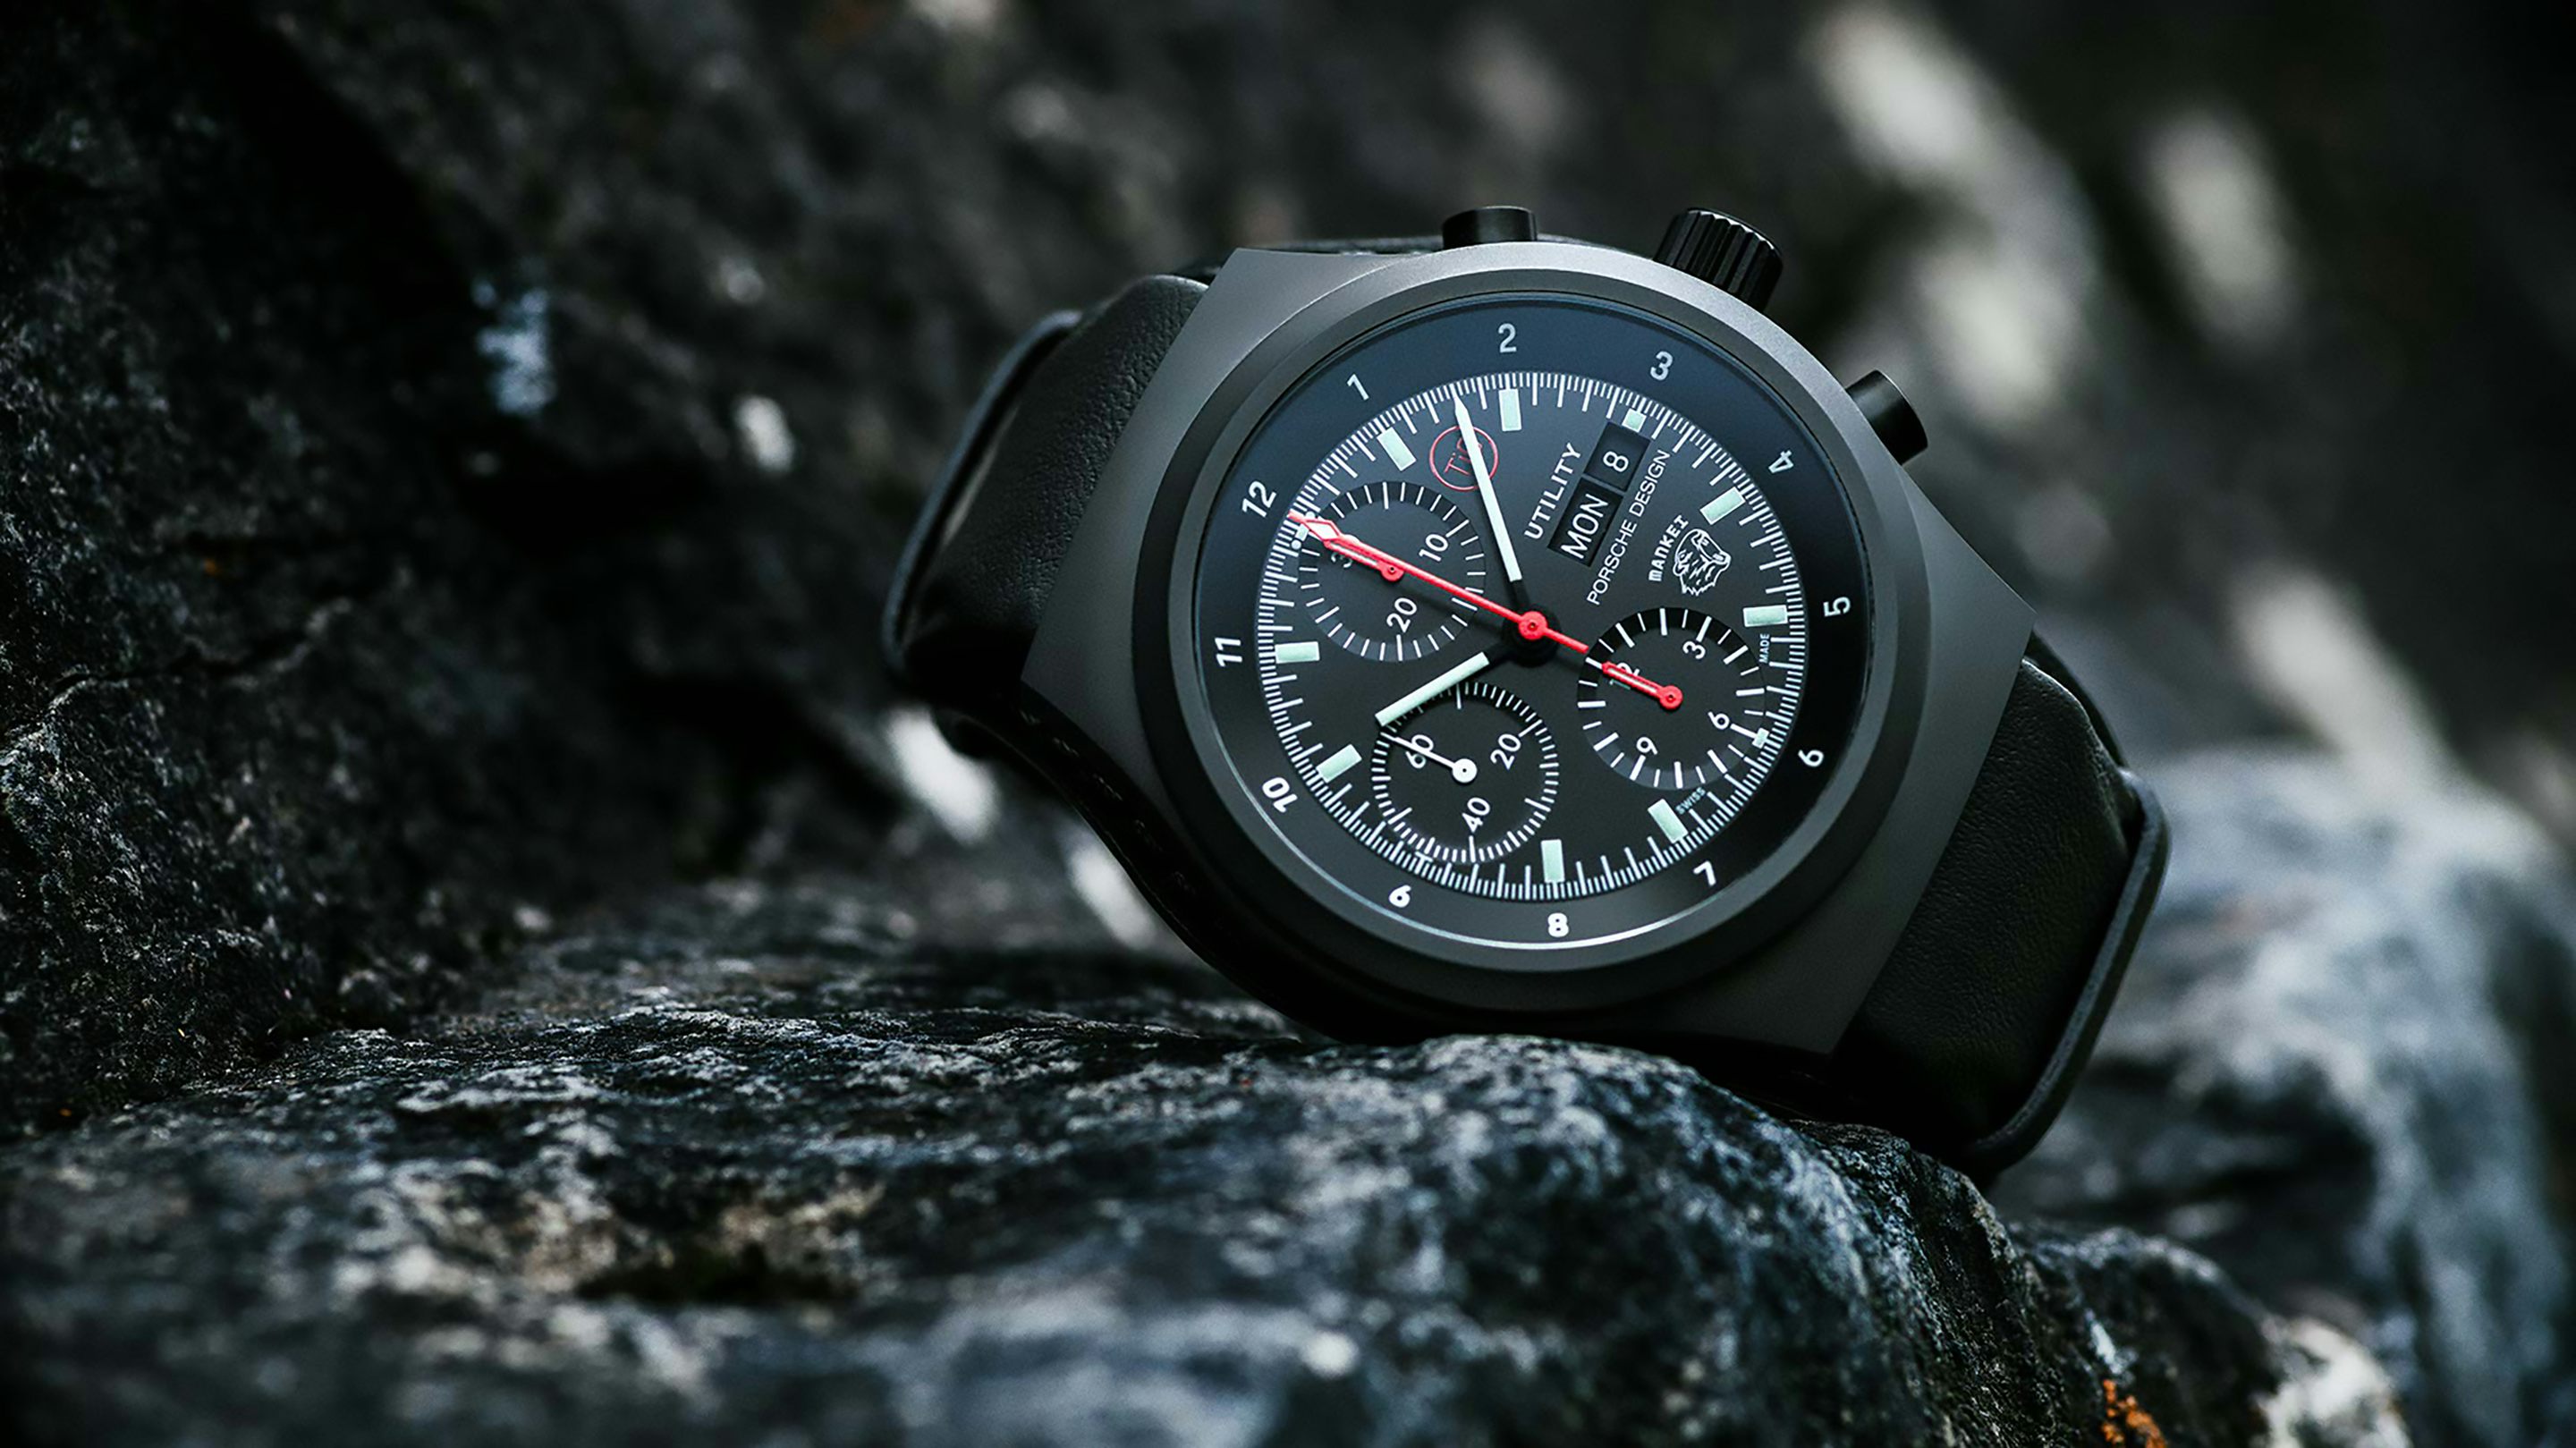 The New Limited Edition Porsche Design Chronograph 1 'Utility' In